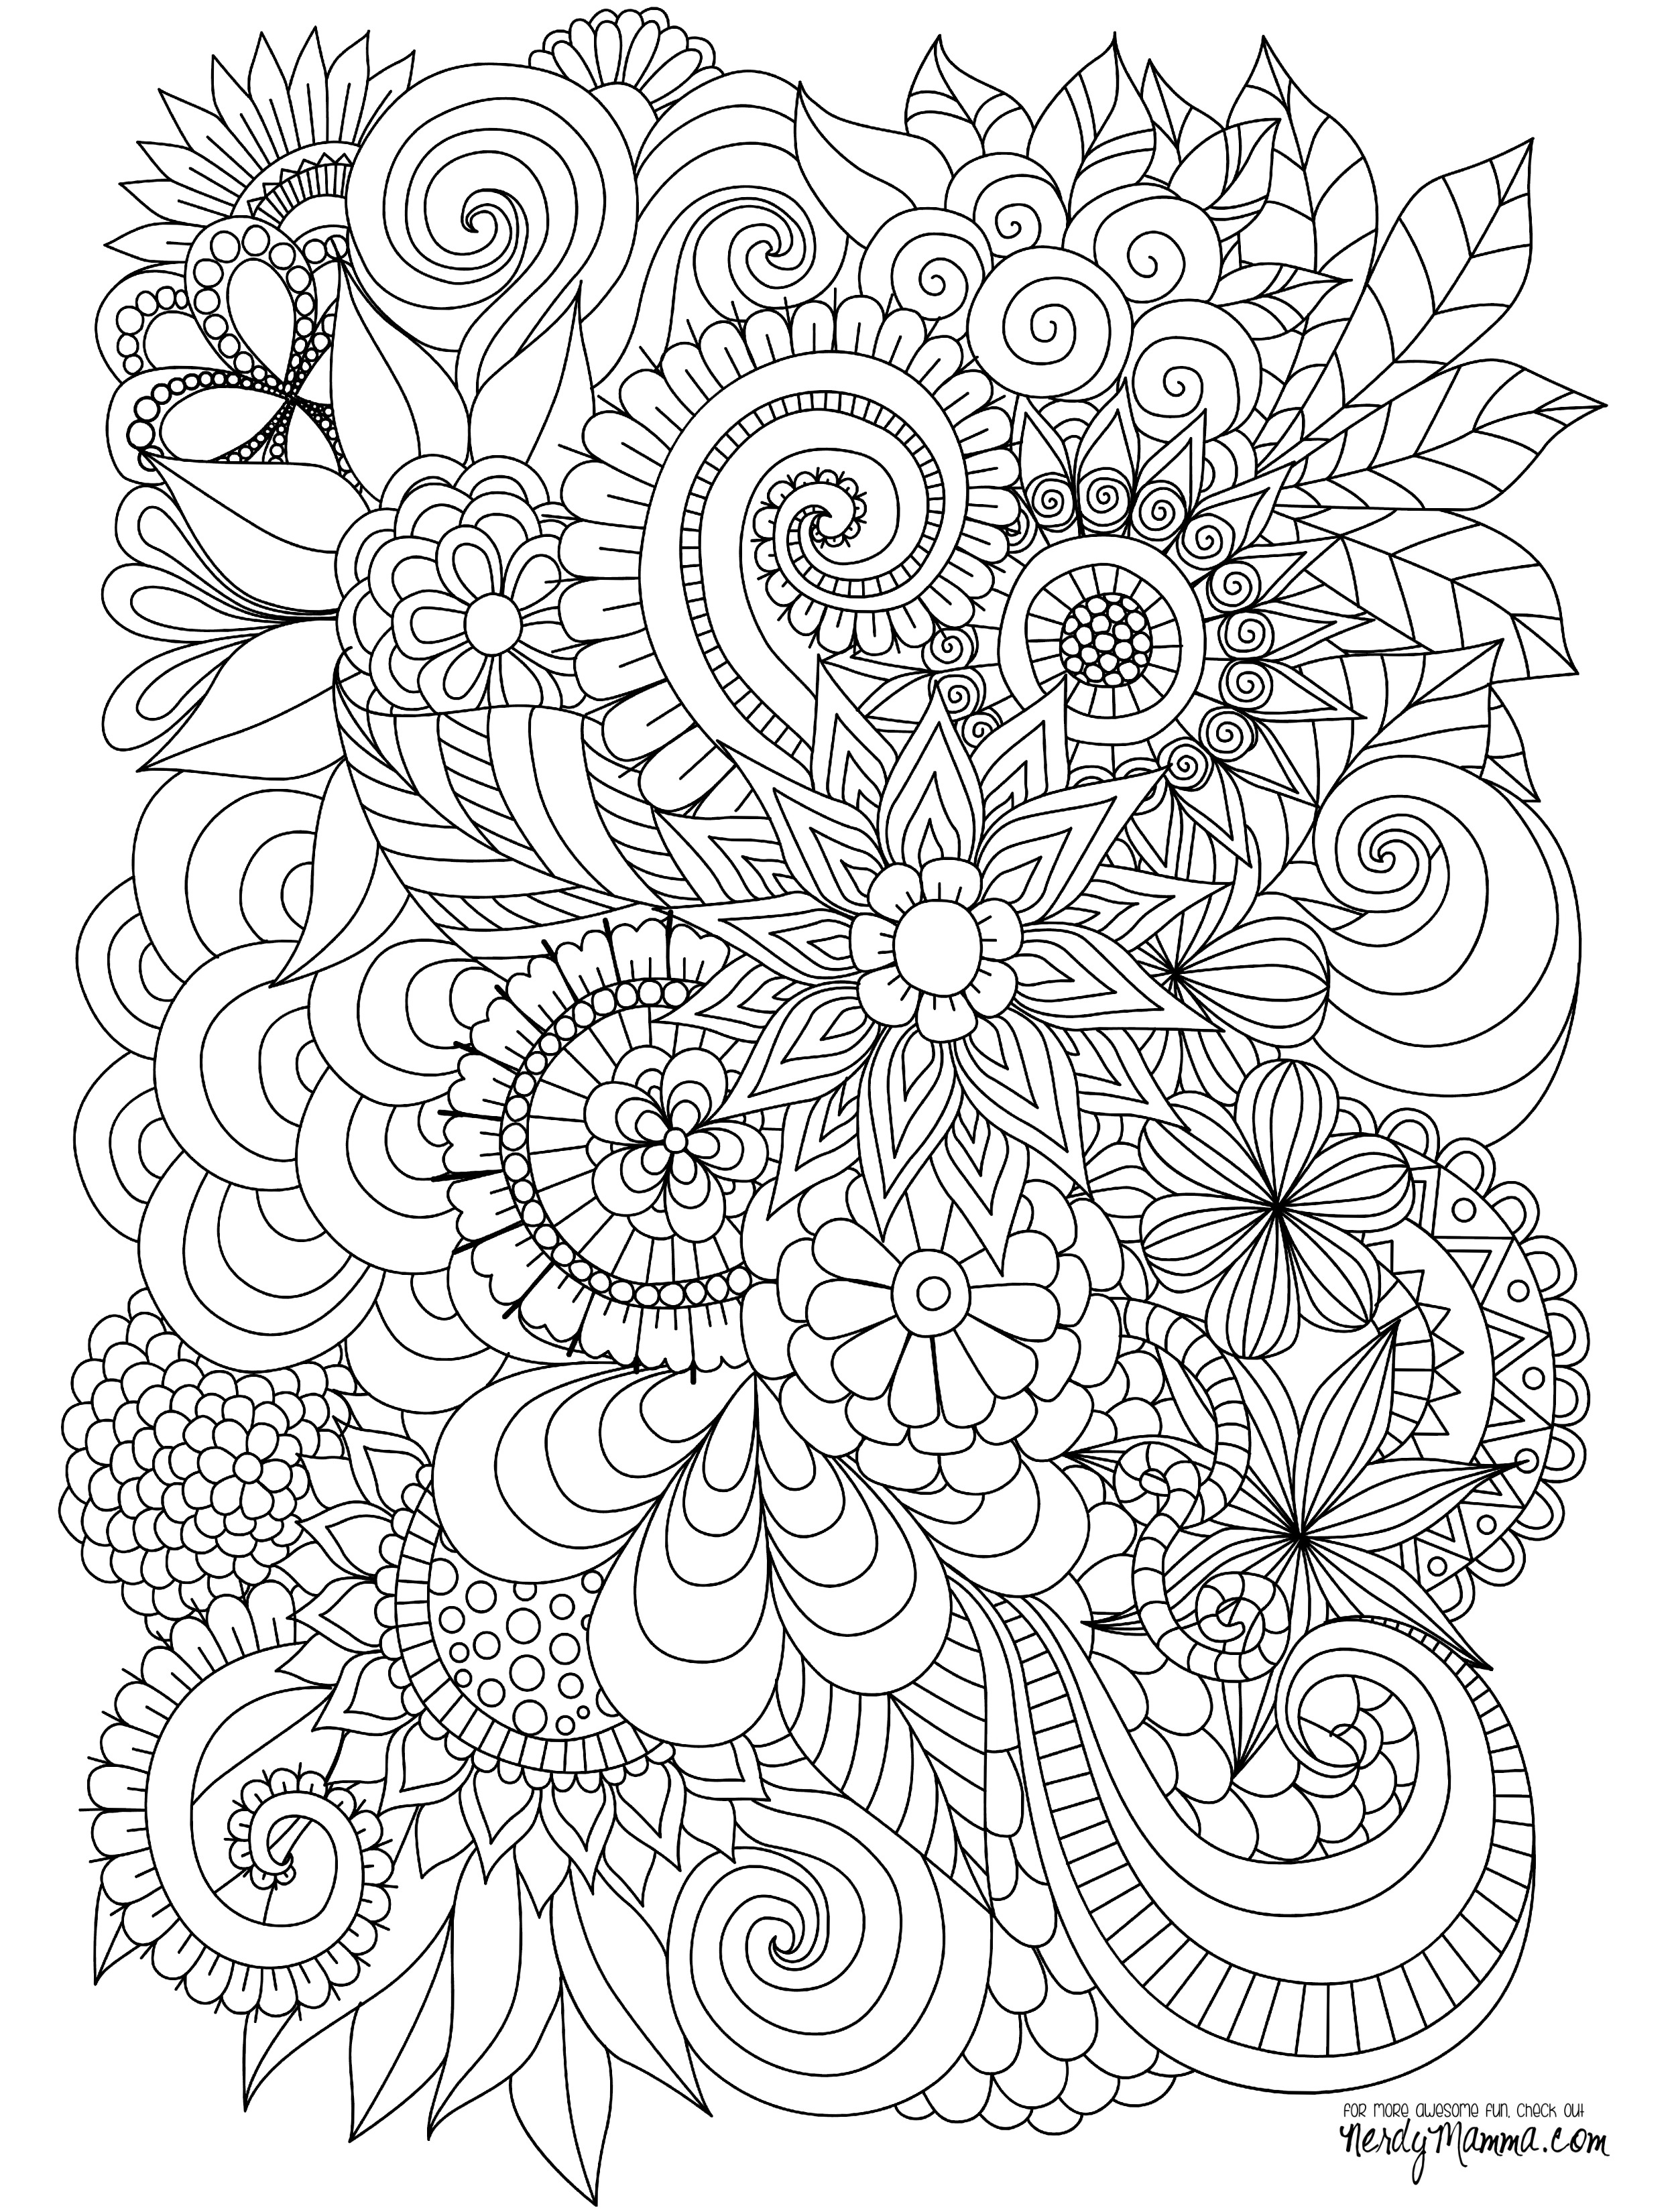 Free Coloring Pages Pdf At GetColorings Free Printable Colorings 